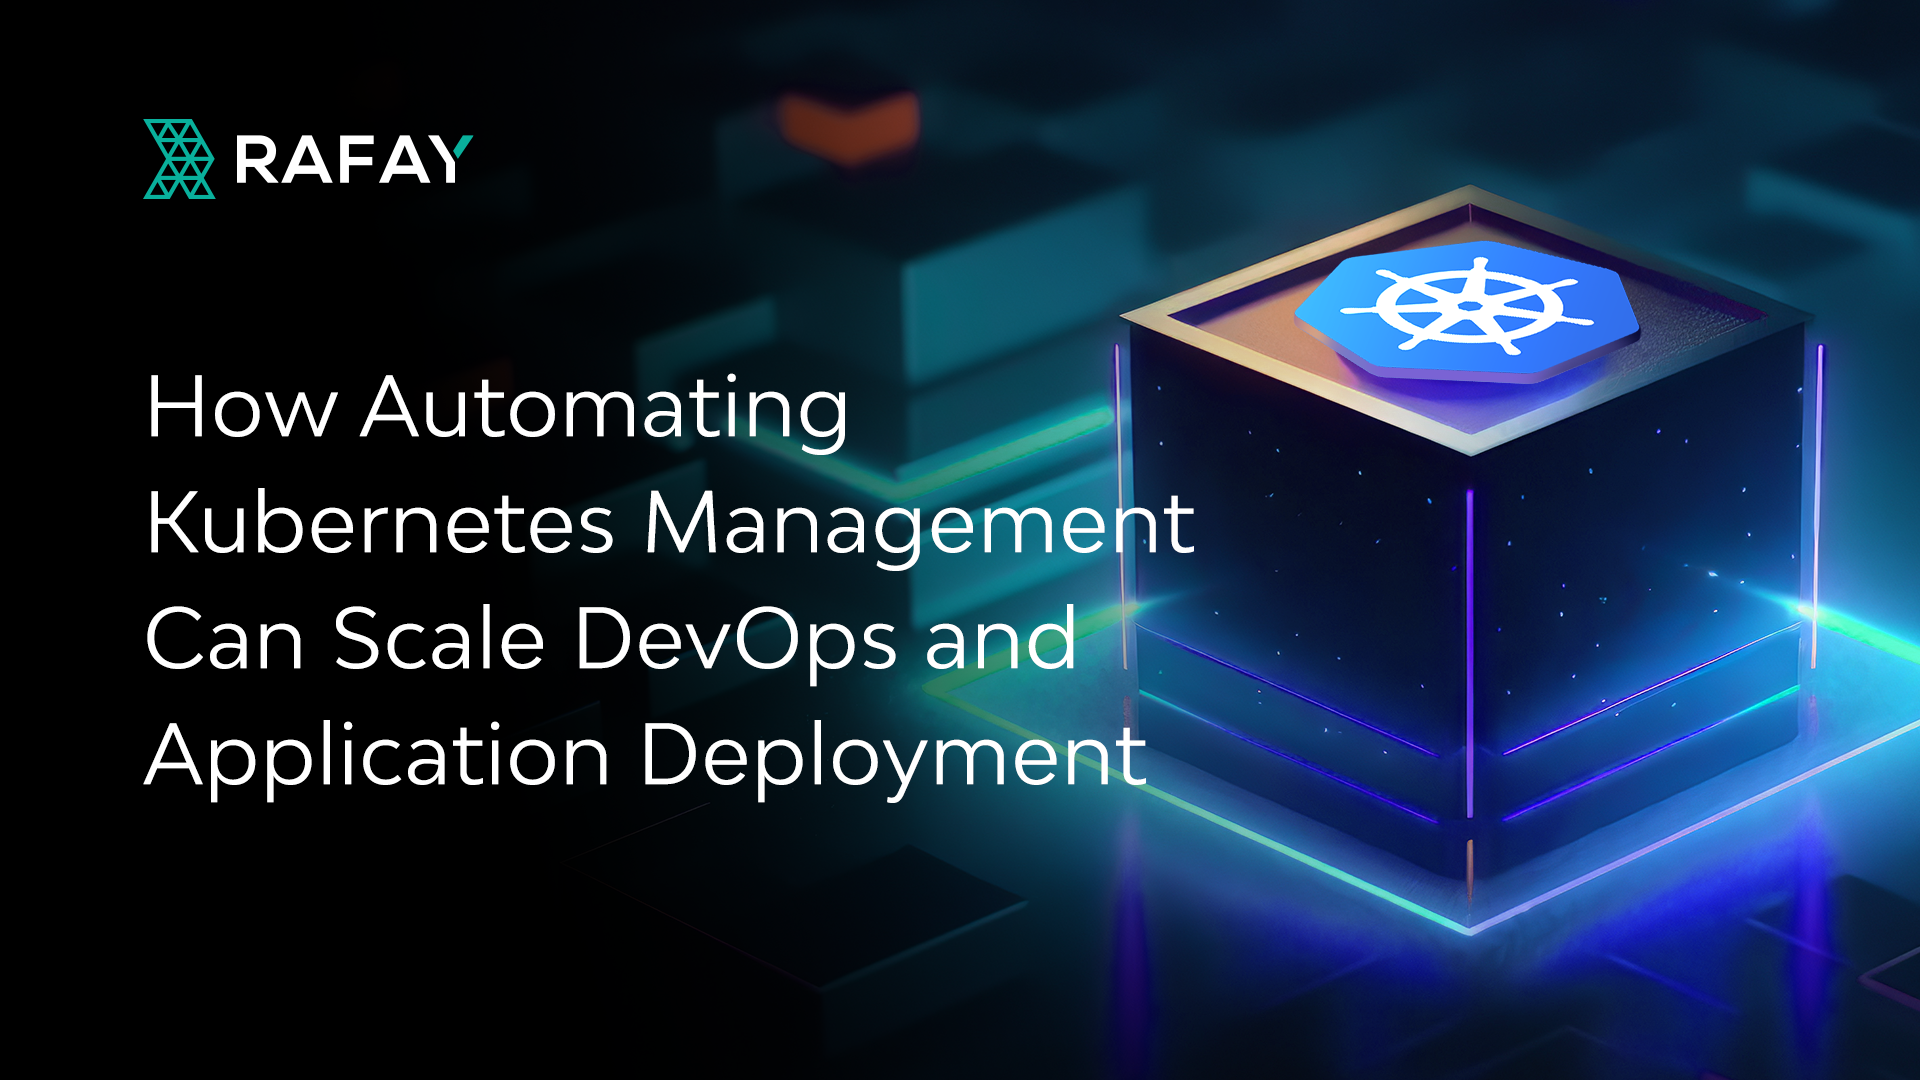 Image for How Automating Kubernetes Management Can Scale DevOps and Application Deployment